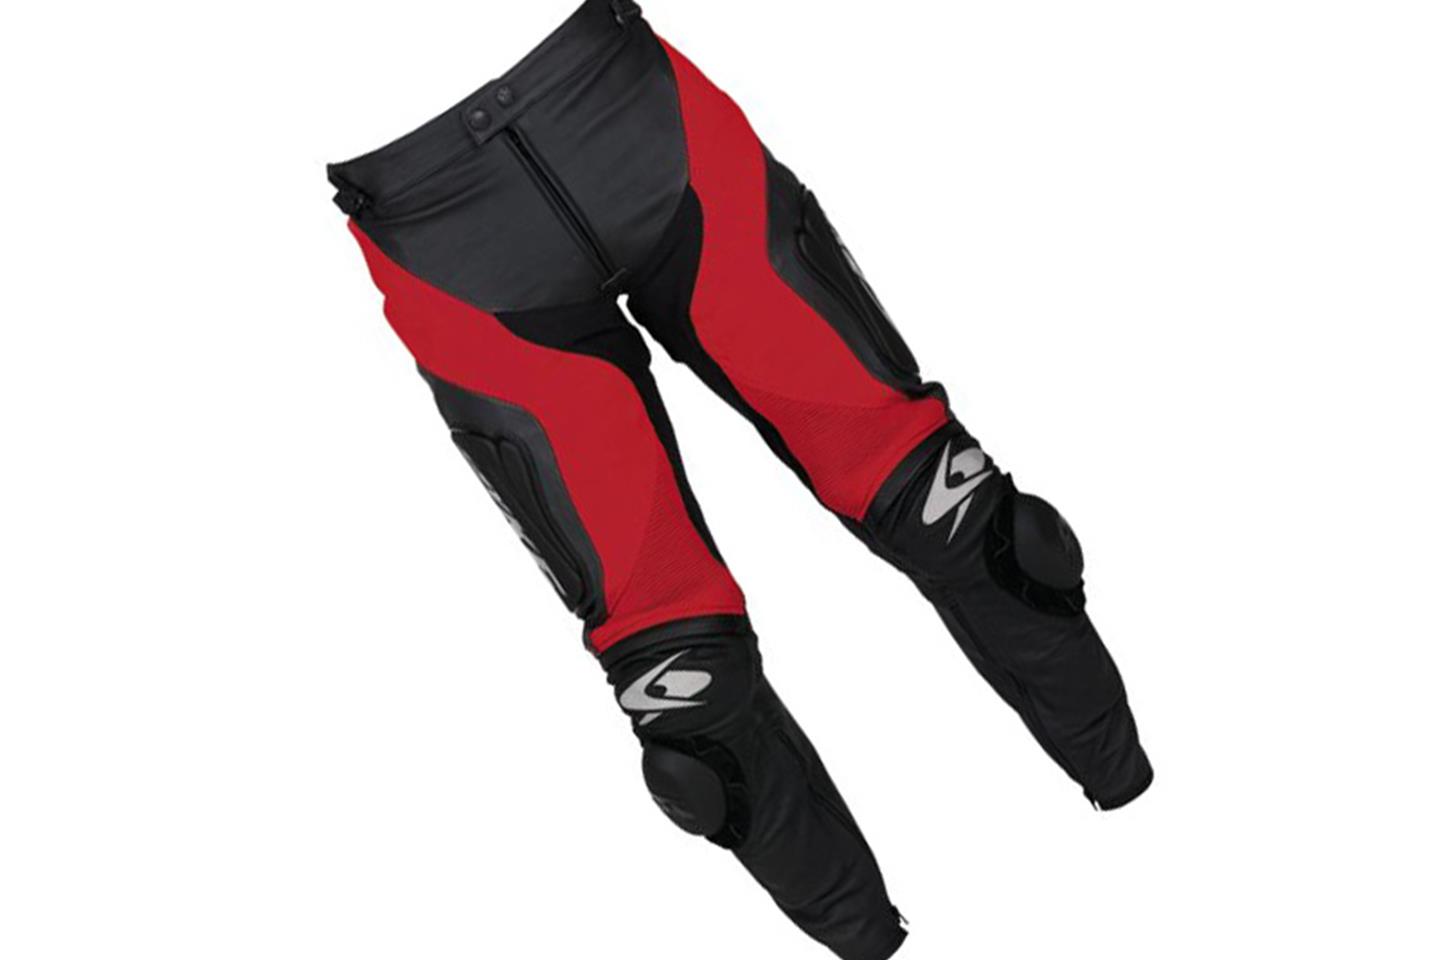 Motorcycle Leather Textile Waterproof Trousers  Dainese Official